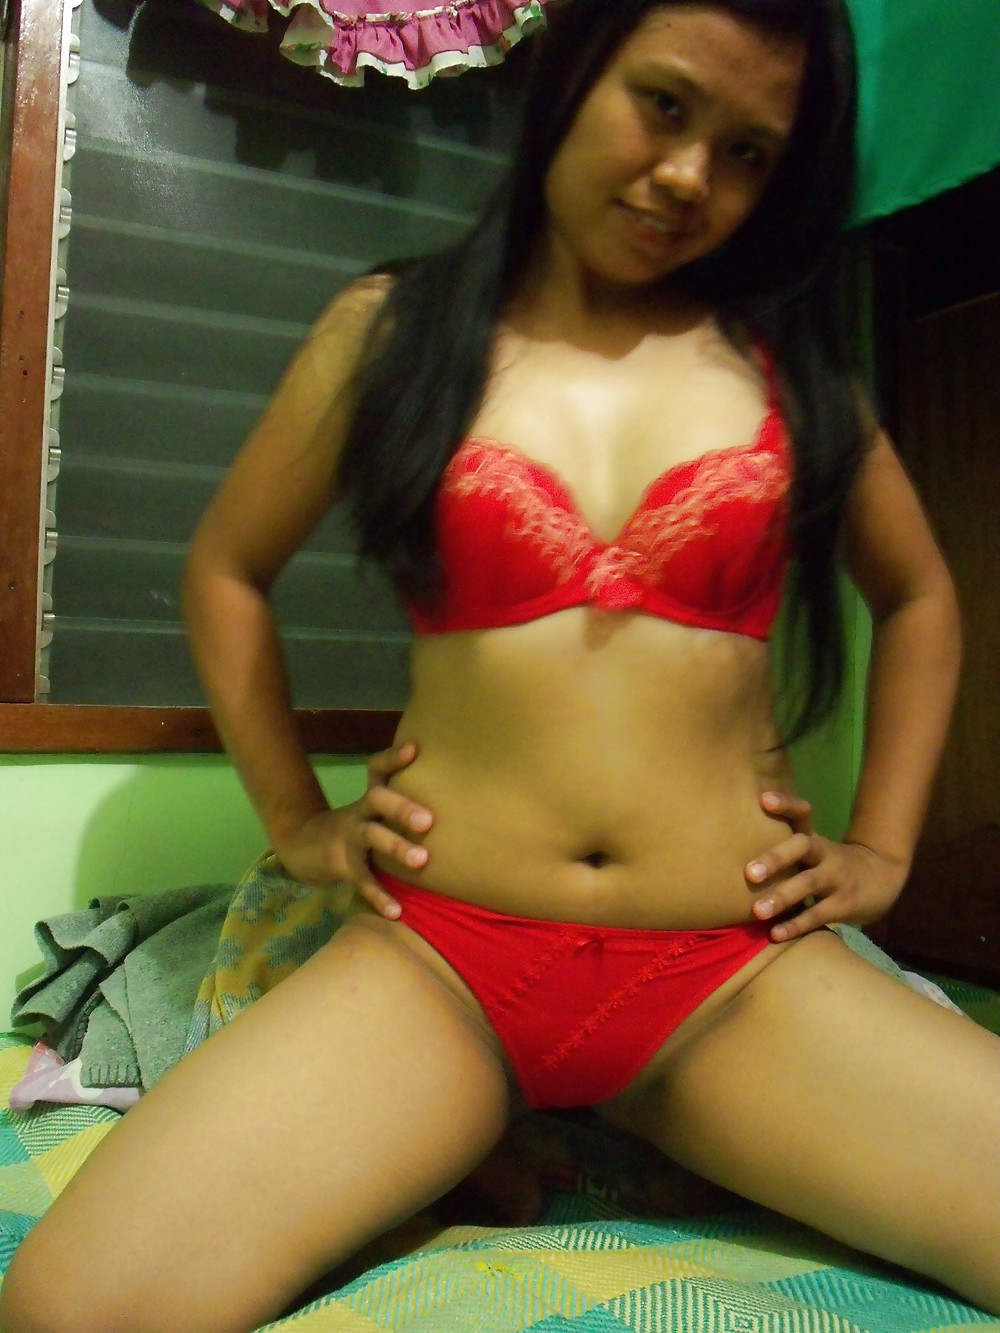 Her name is Ivy she is Filipino met her online  #24790928